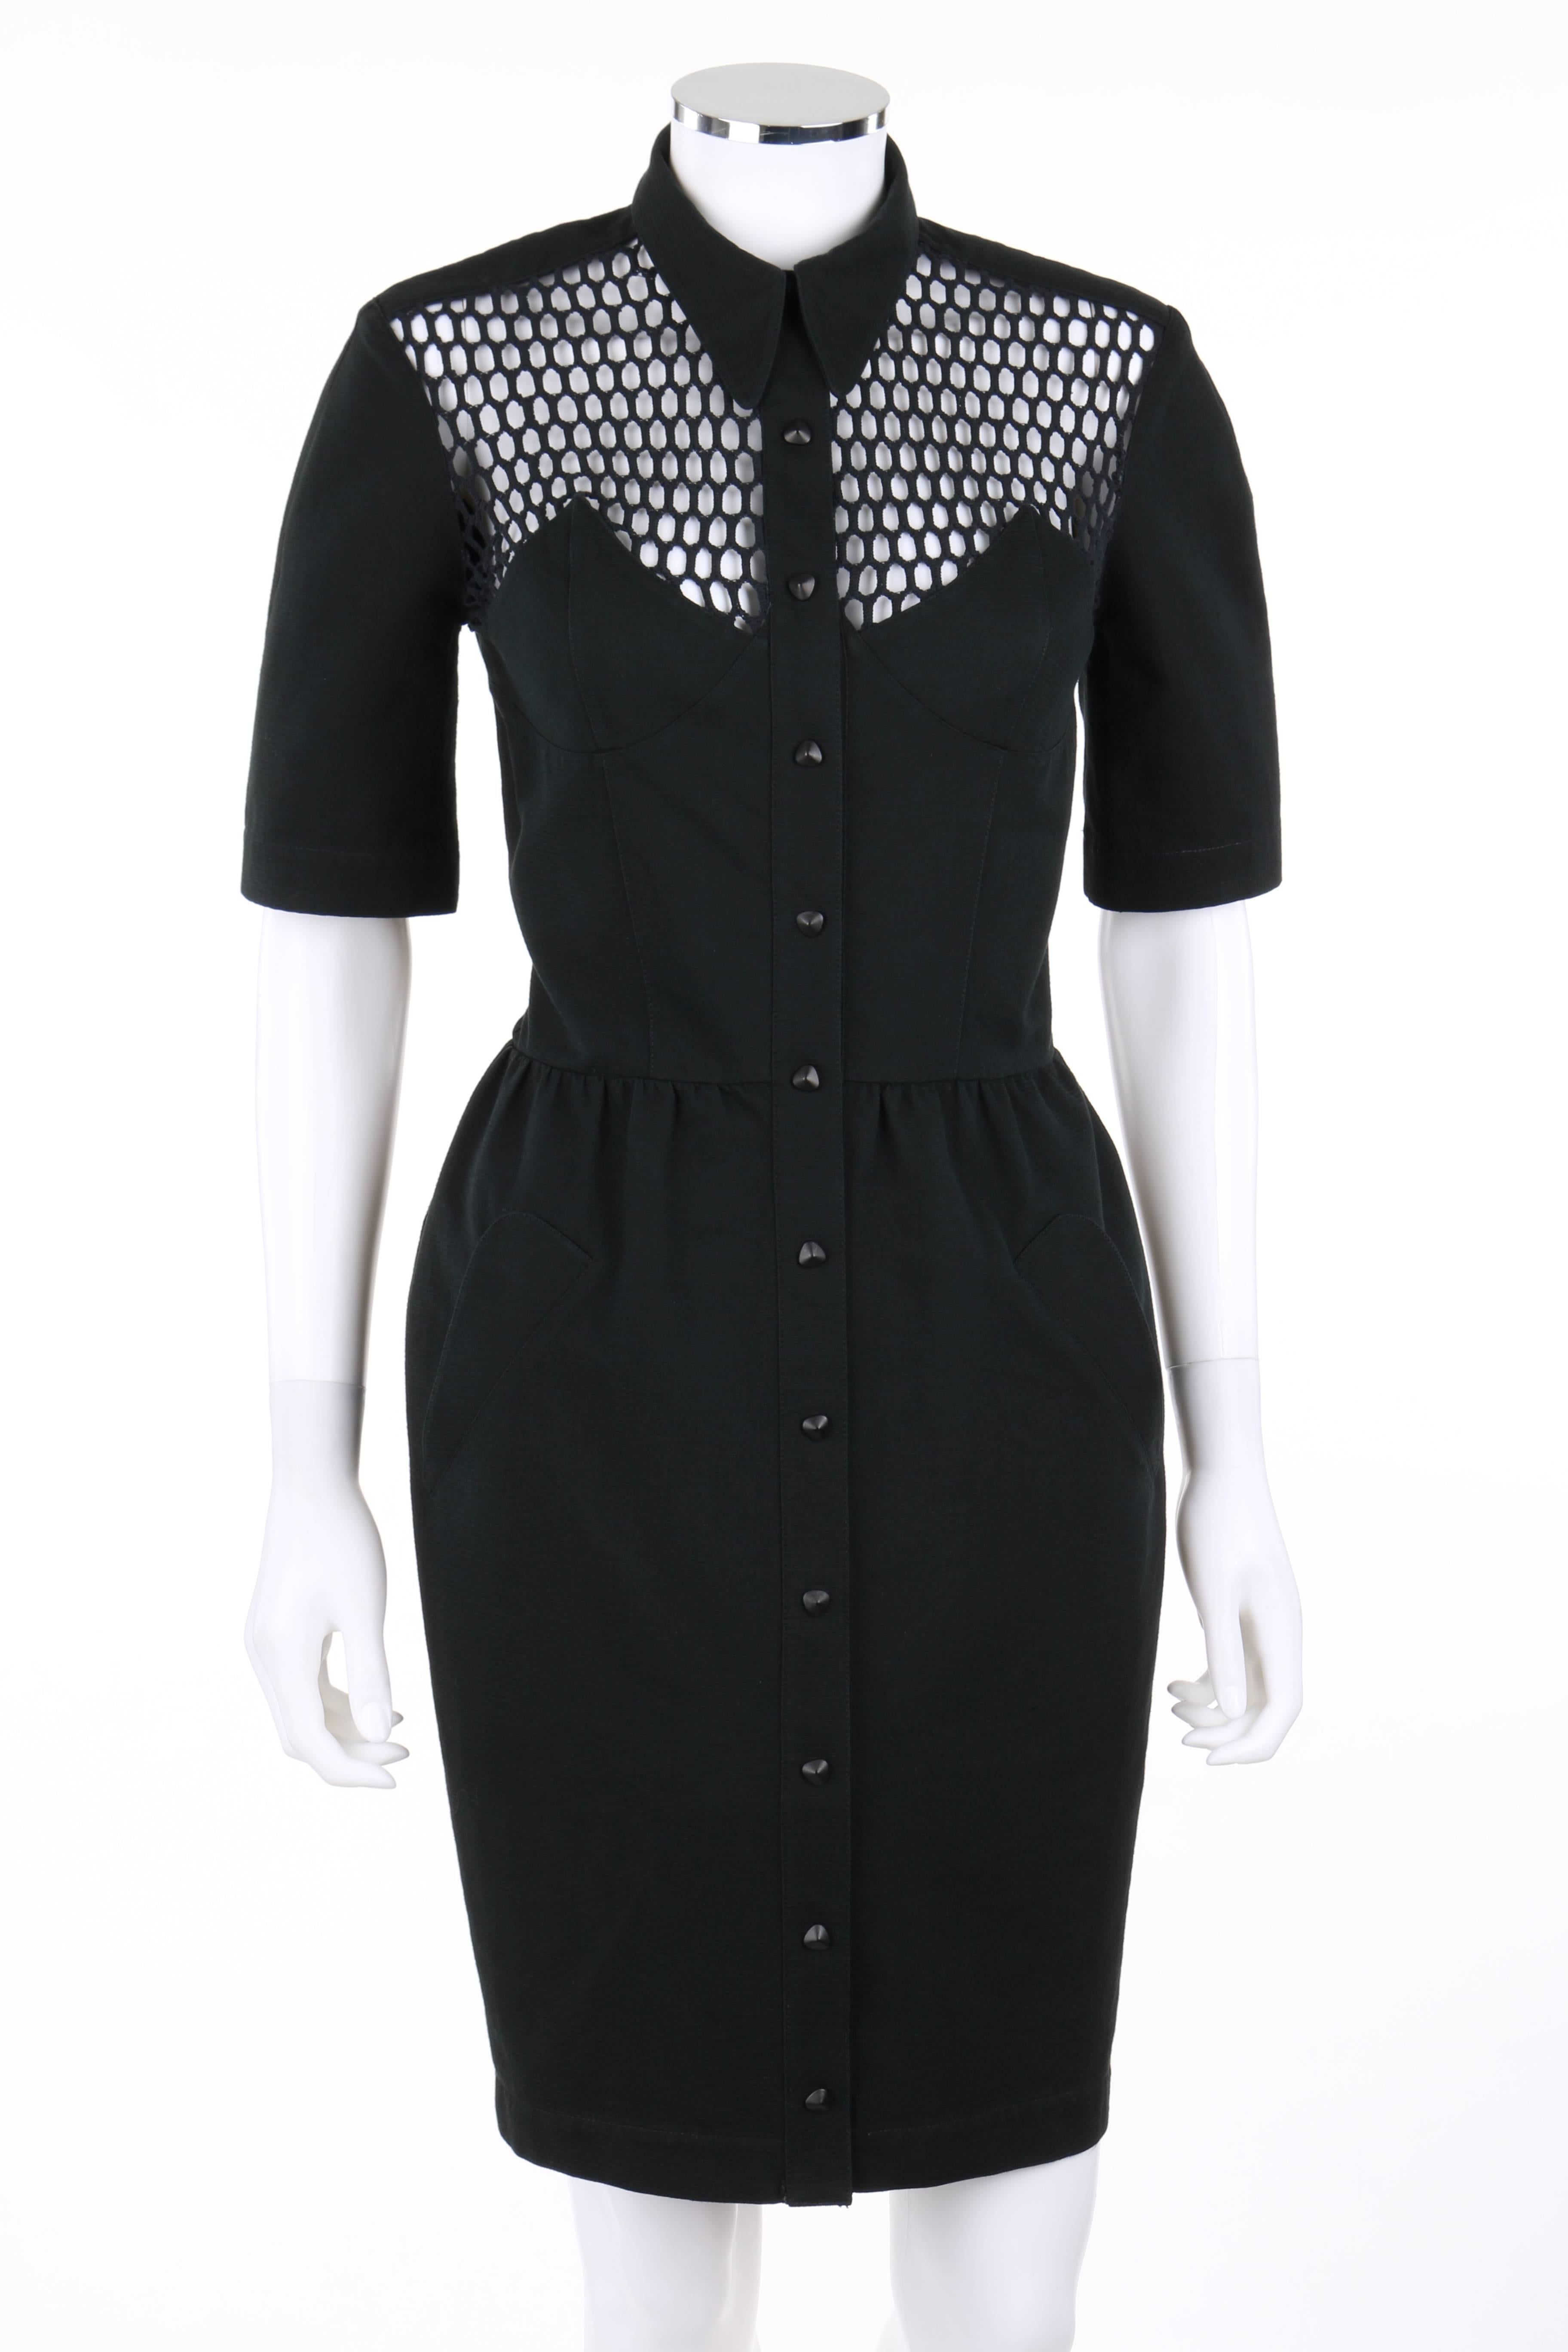 Thierry Mugler S/S 1985 shirt dress. Illusion fish net front and back at top of bodice. Shirt collar. Pointed bust detail. Short sleeves. Twelve center front black triangle shaped snap closures. Sheath style. Two front angled hip pockets. Partially